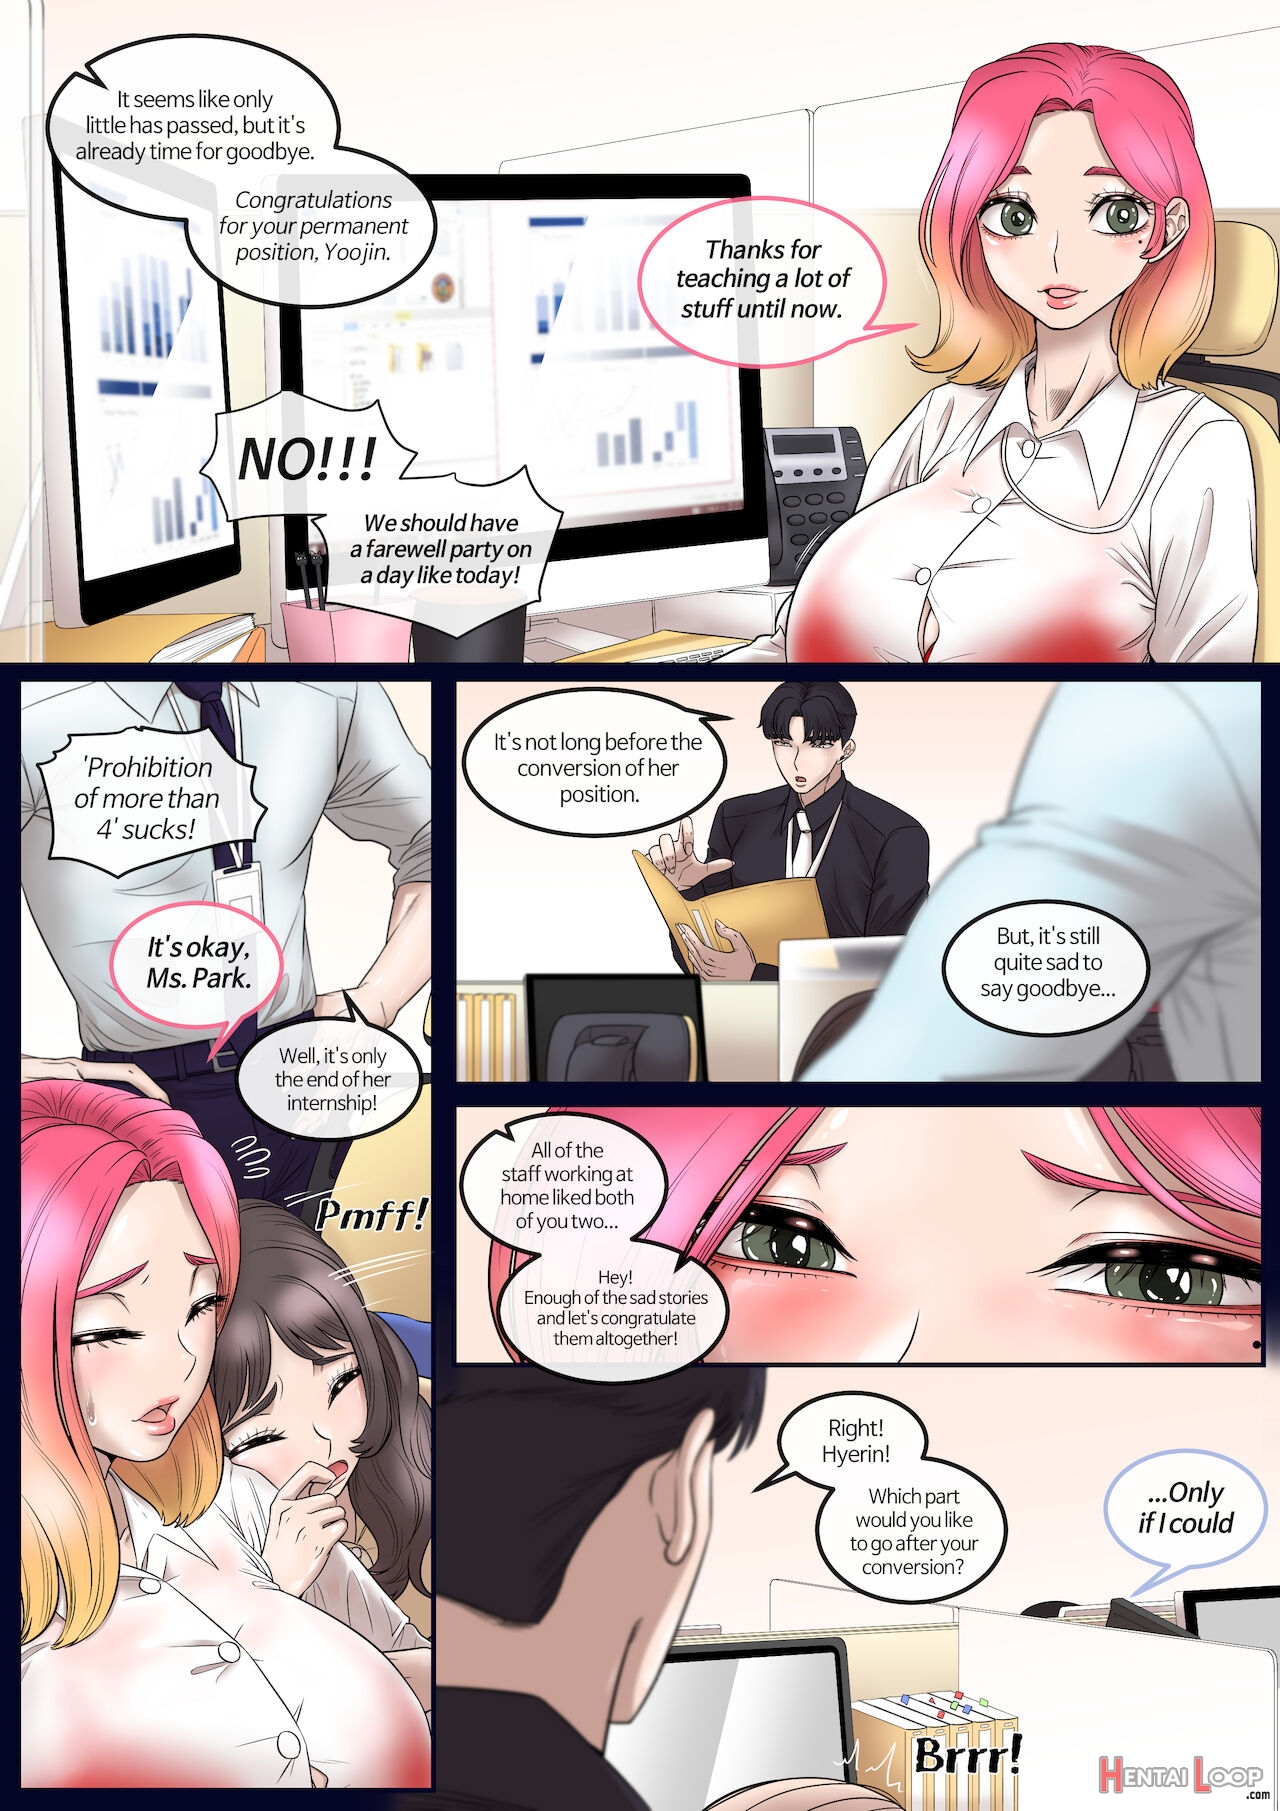 New Recruit 1 page 3